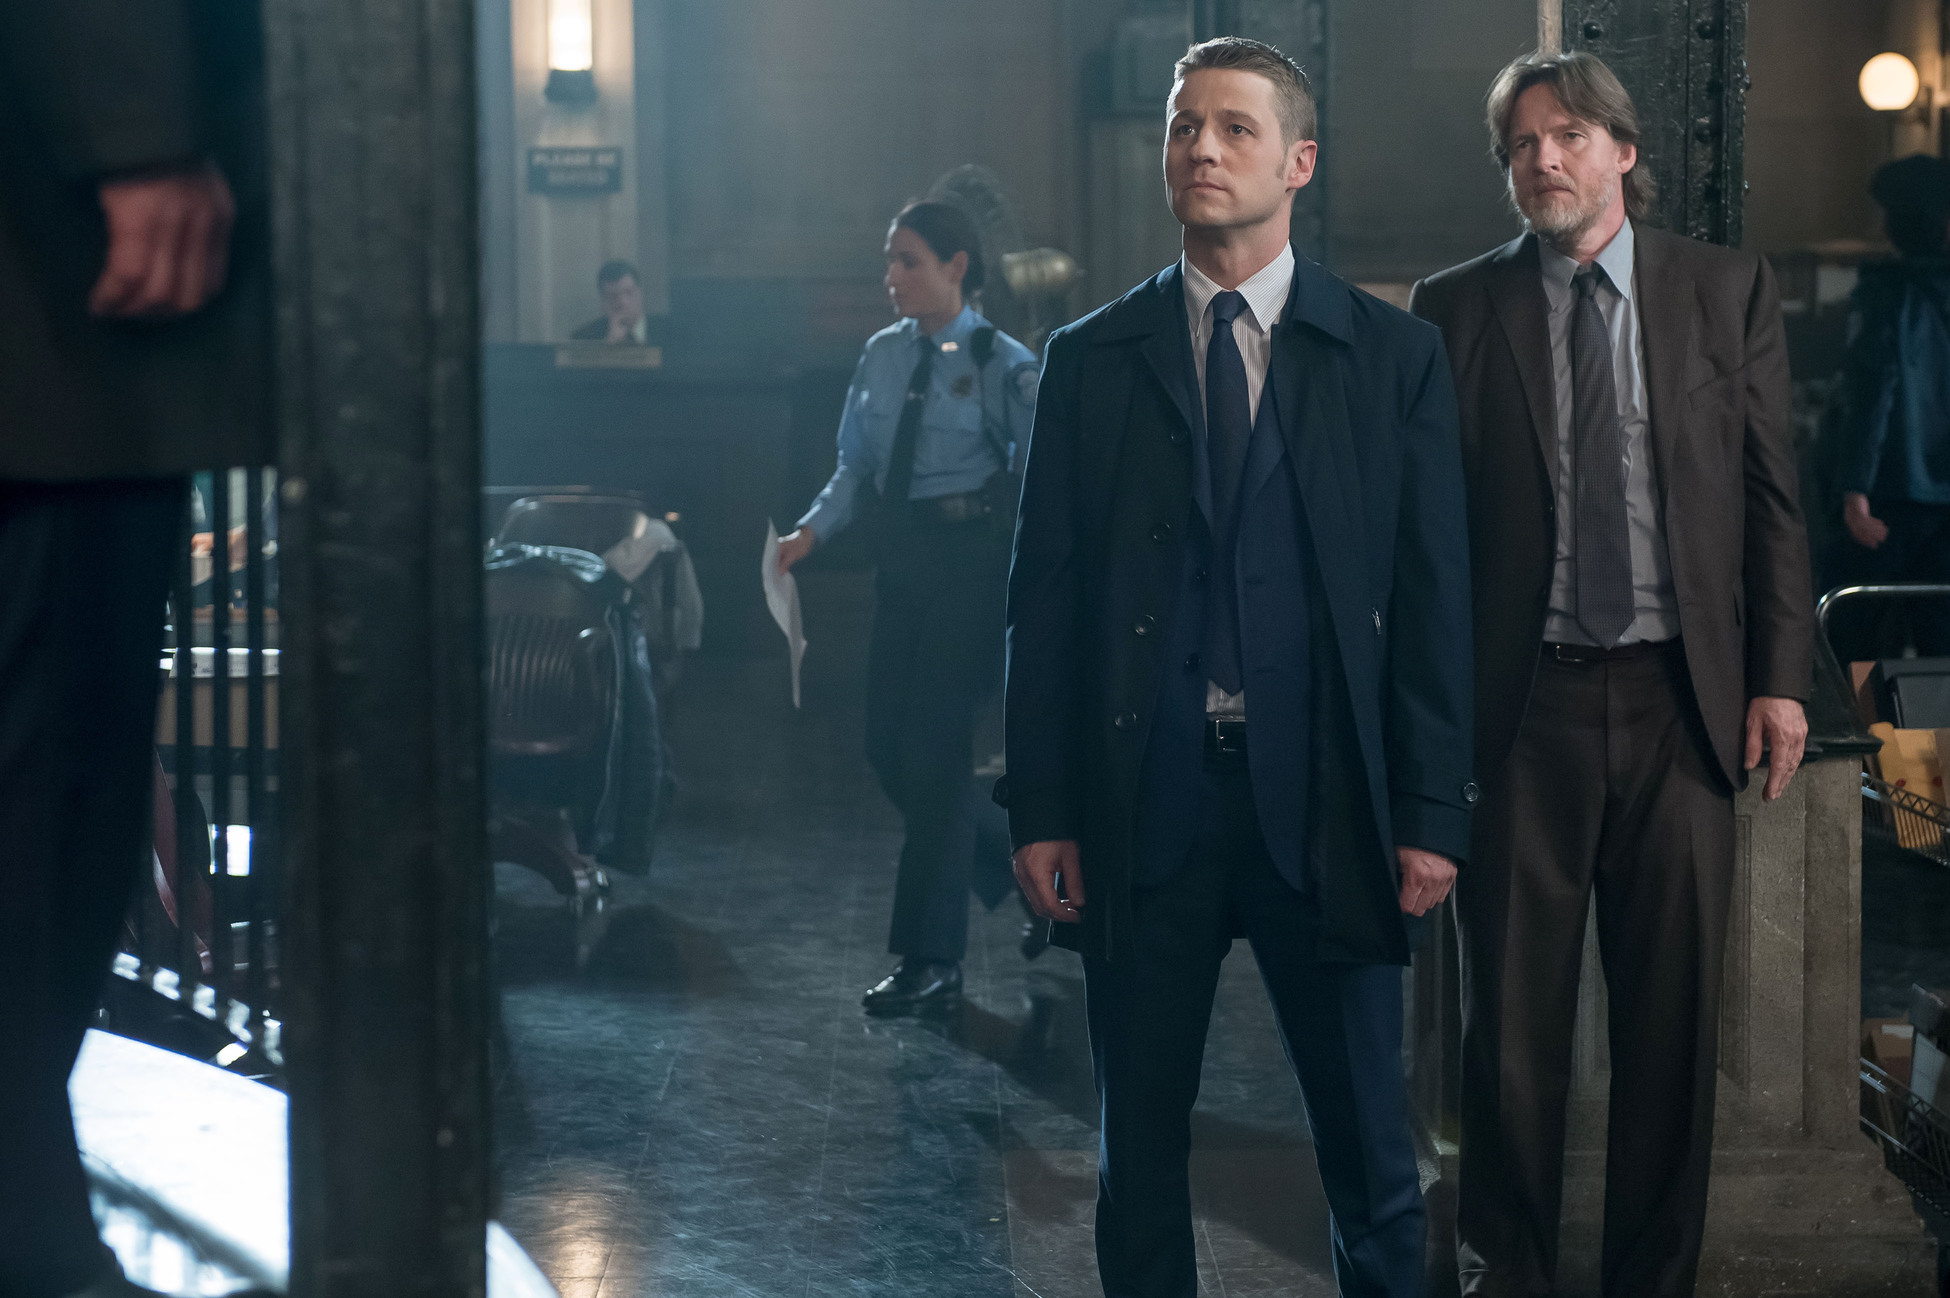 GOTHAM: Detective James Gordon (Ben McKenzie, L) stands up to Commissioner Loeb in the "What The Little Bird Told Him" episode of GOTHAM airing Monday, Jan. 19 (8:00-9:00 PM ET/PT) on FOX. Also pictured: Donal Logue. Â©2014 Fox Broadcasting Co. Cr: Jeff Neumann/FOX